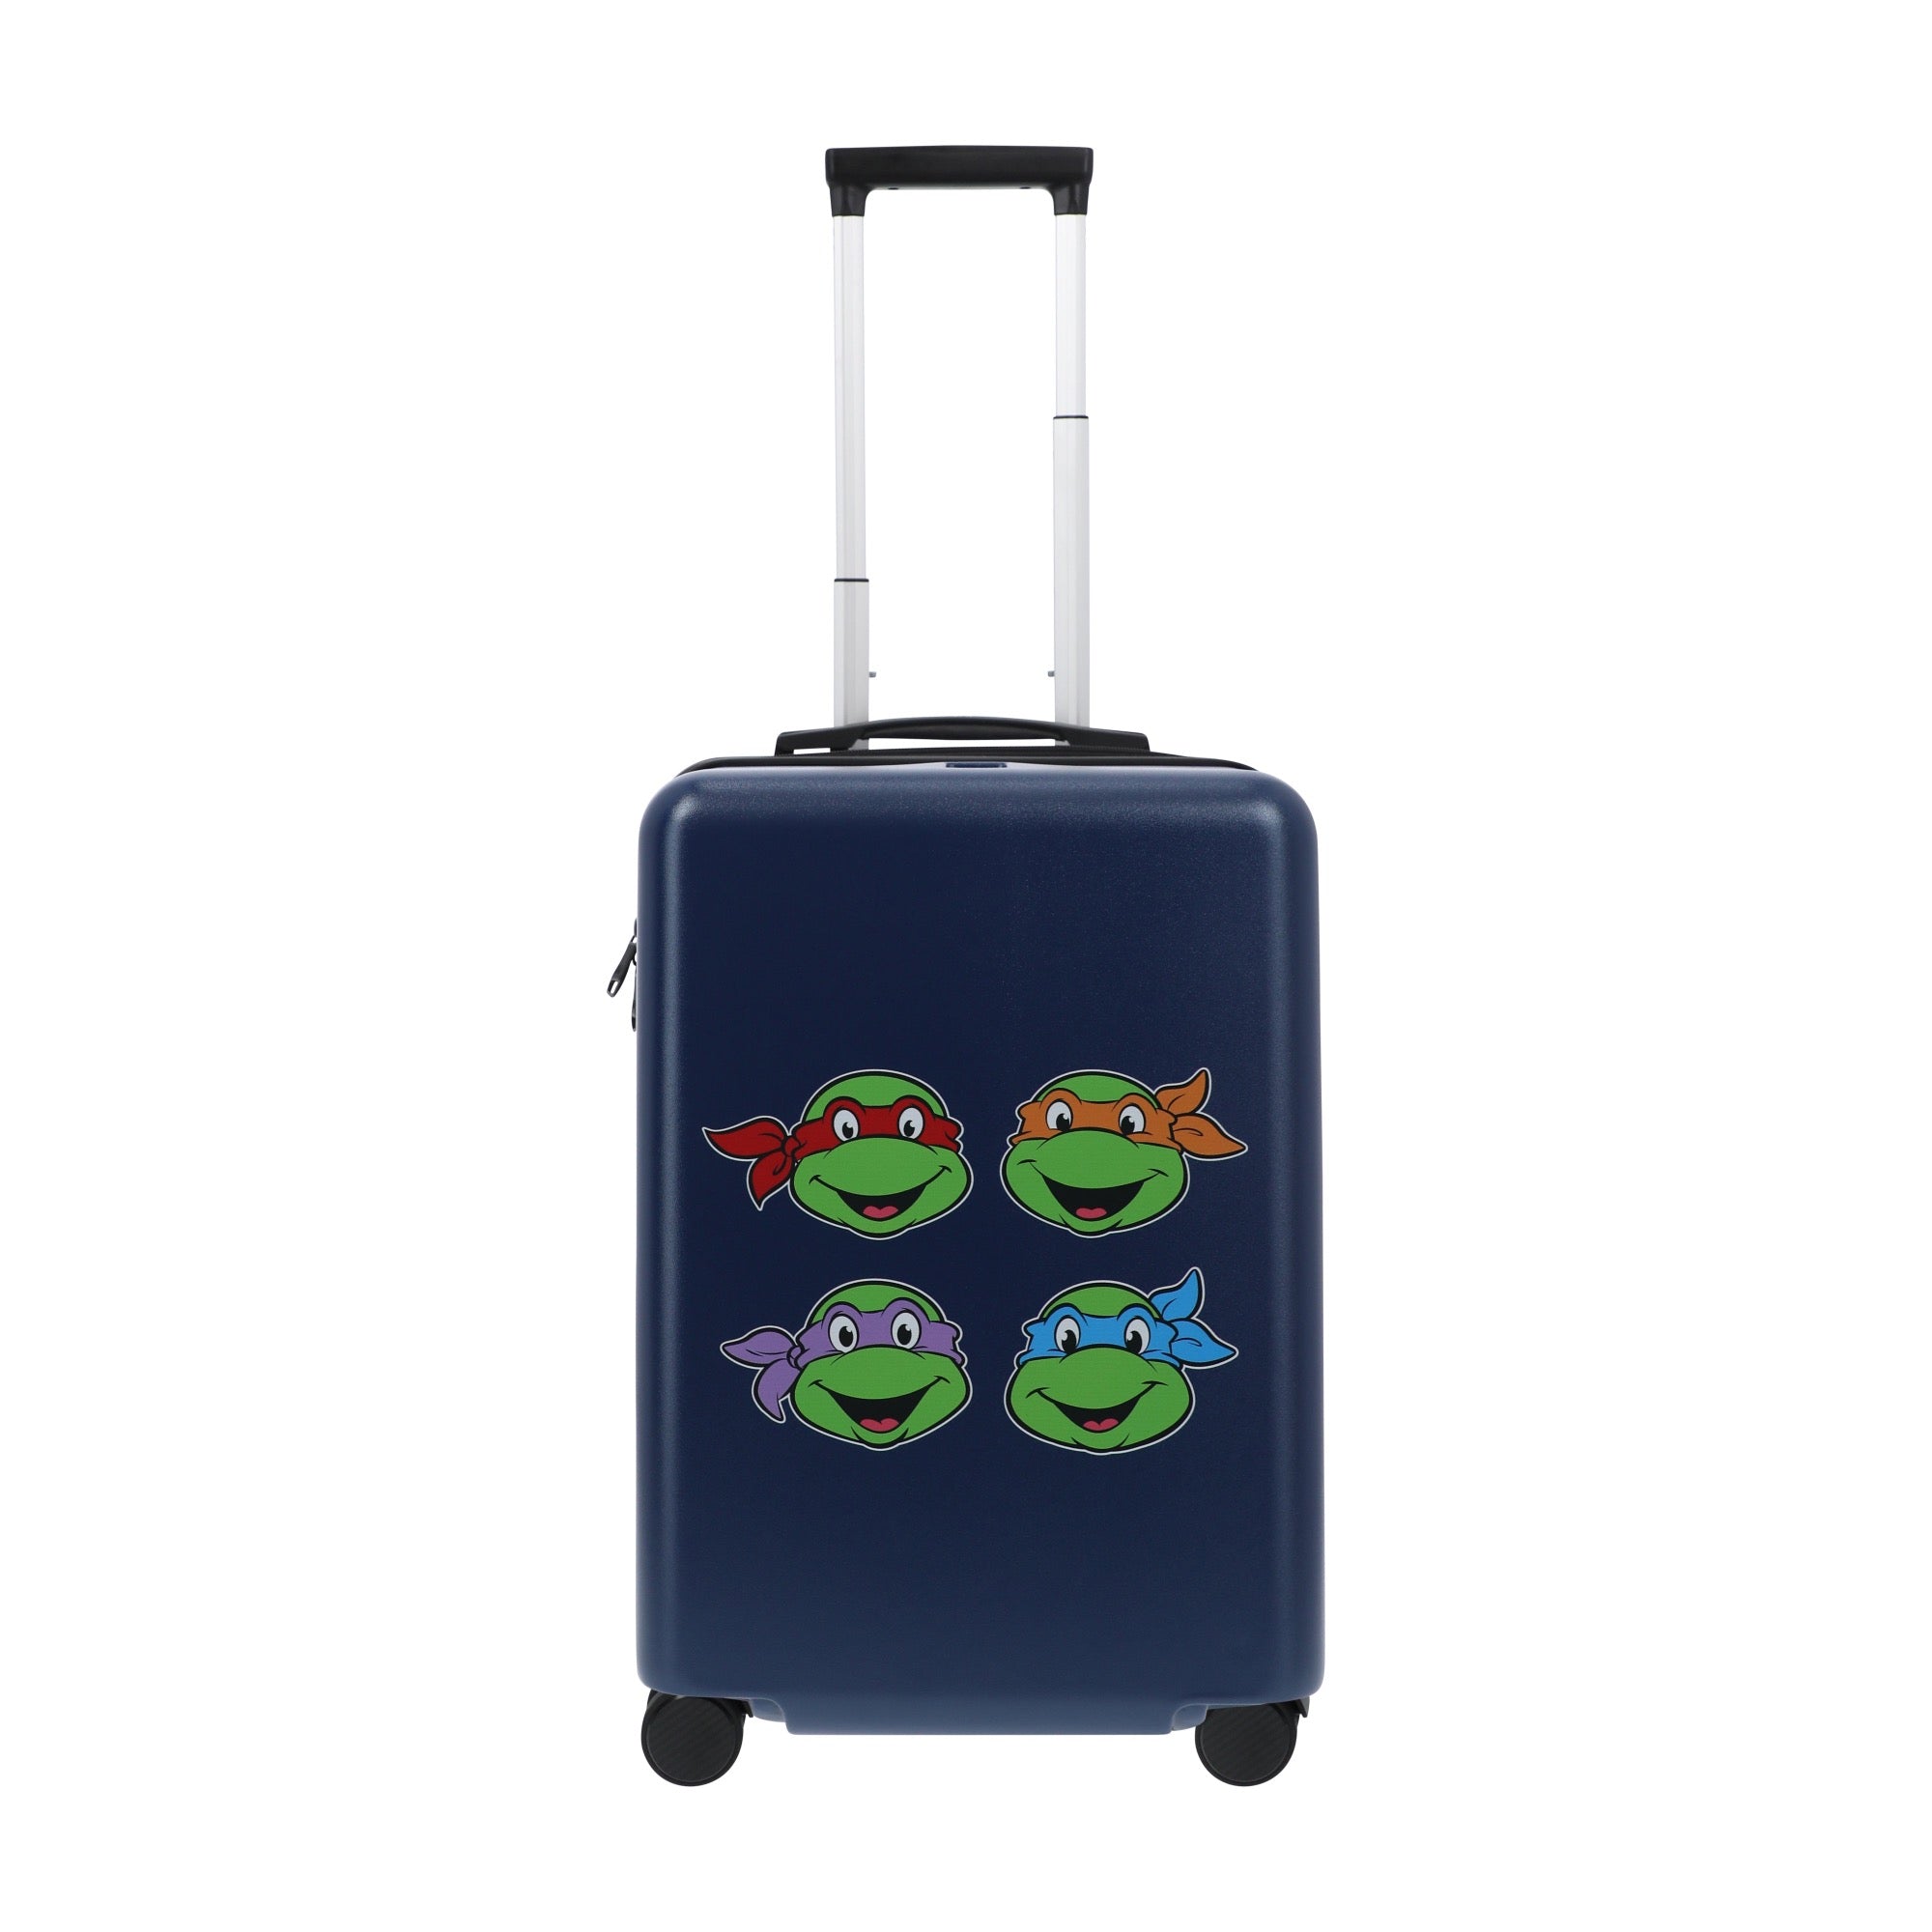 Navy blue paramount TMNT 22.5" carry-on spinner suitcase luggage by Ful